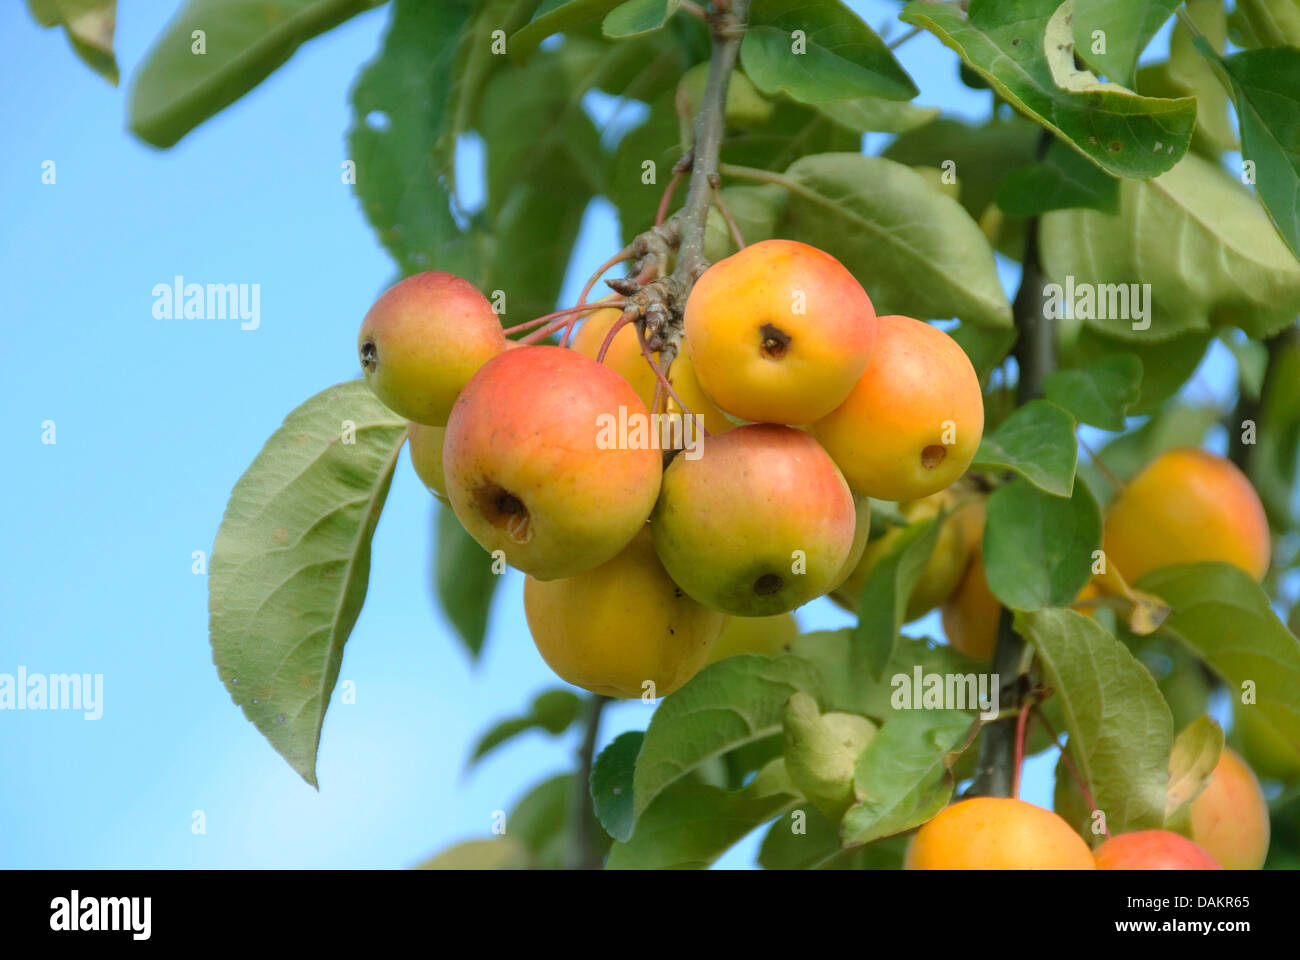 Japanese Crab (Malus 'Butterball', Malus Butterball), cultivar Butterball, branch with fruits Stock Photo